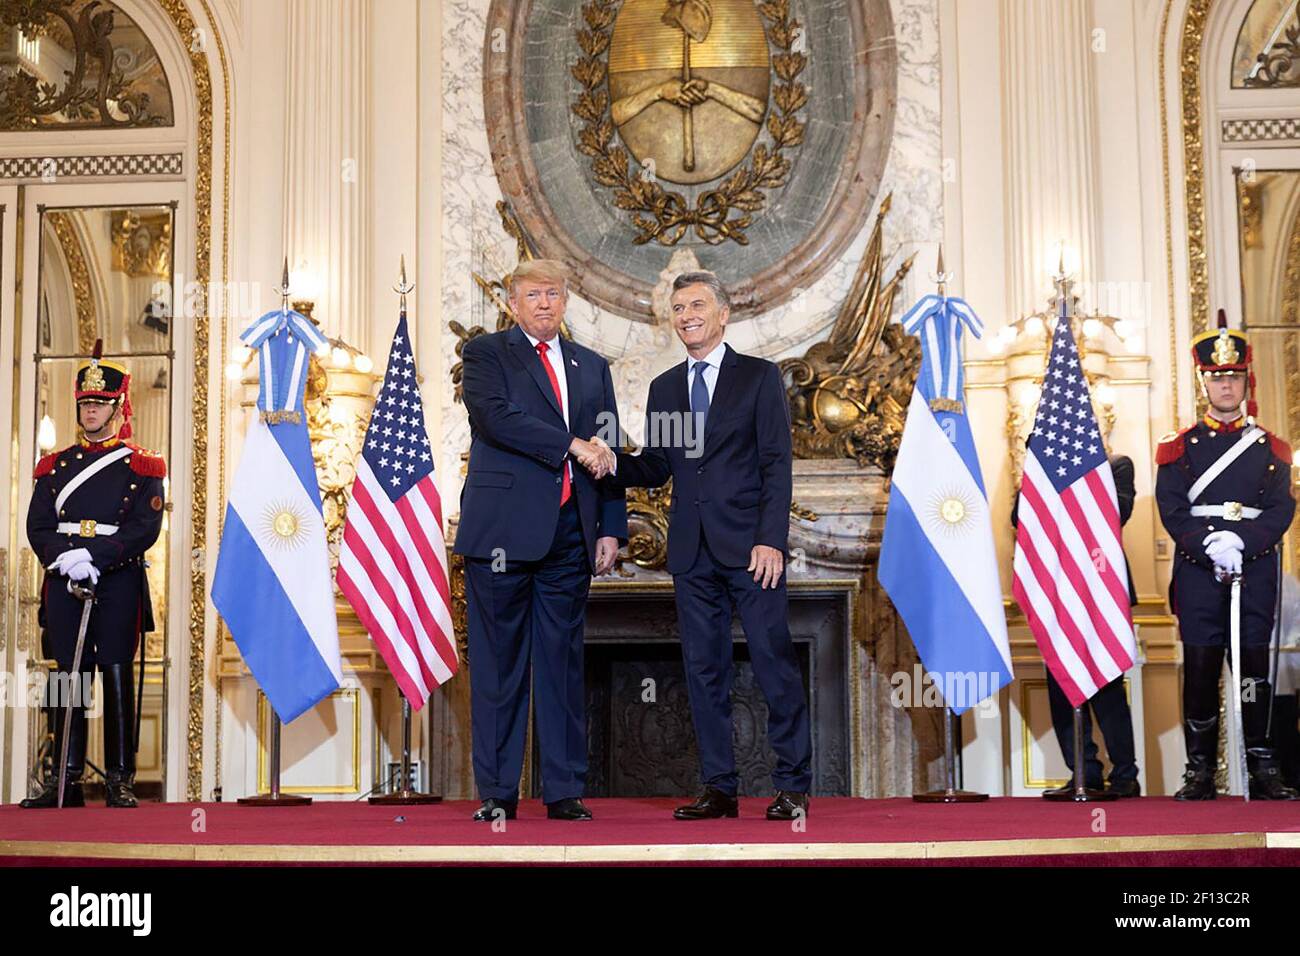 President Donald Trump participates in an expanded bilateral meeting with President Mauricio Macri of the Argentine Republic at the Casa Rosada in Buenos Aires Argentina. Stock Photo